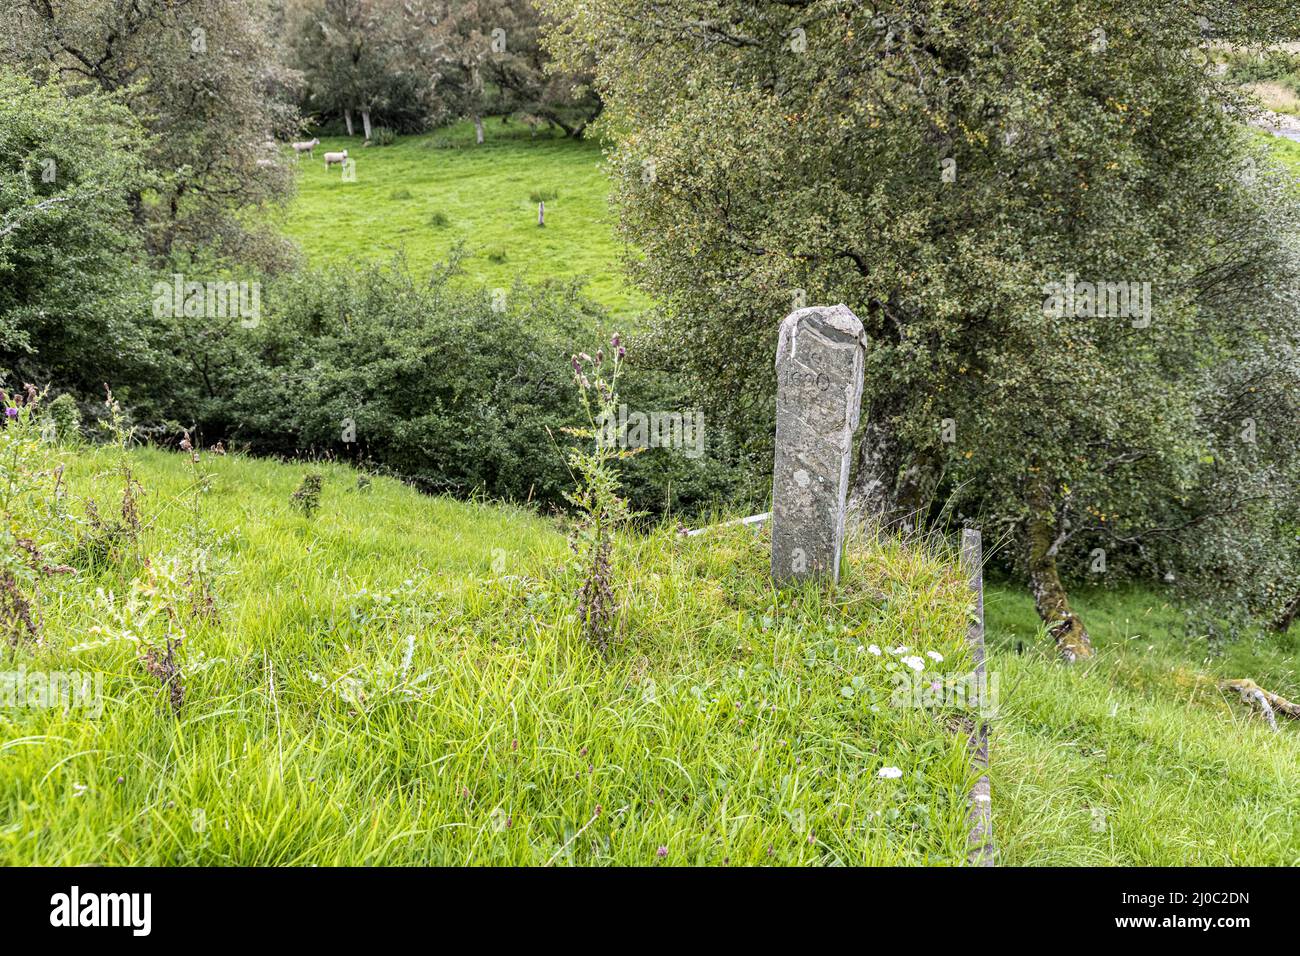 The Soldier Stone marking the grave of a Highland soldier (who died following the Battle of Cromdale in 1690) near Ruthven., Moray, Scotland UK. Stock Photo